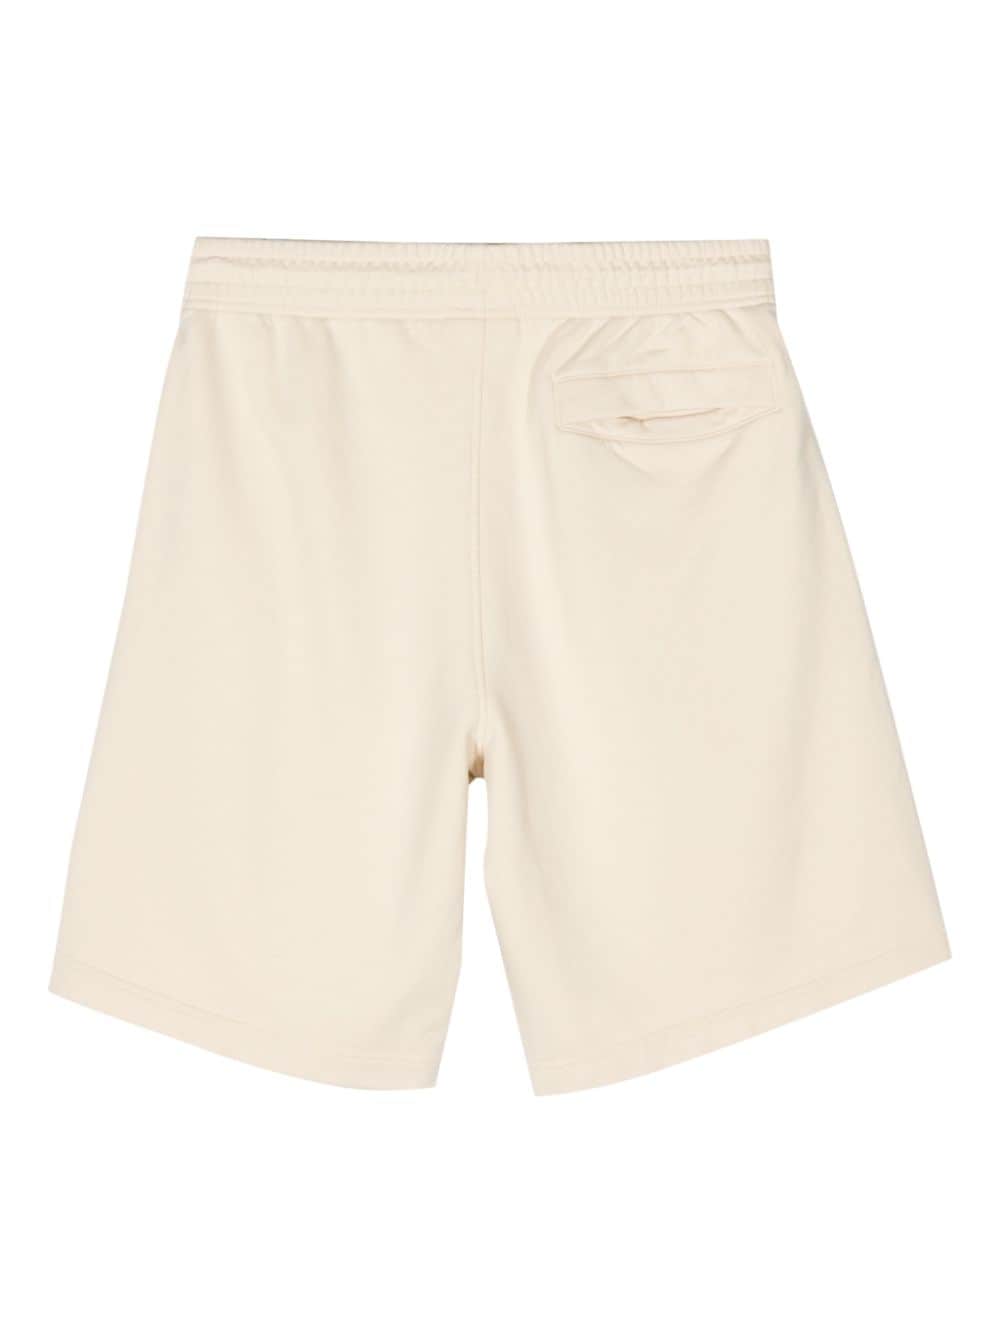 Fox-patch track shorts<BR/><BR/><BR/>